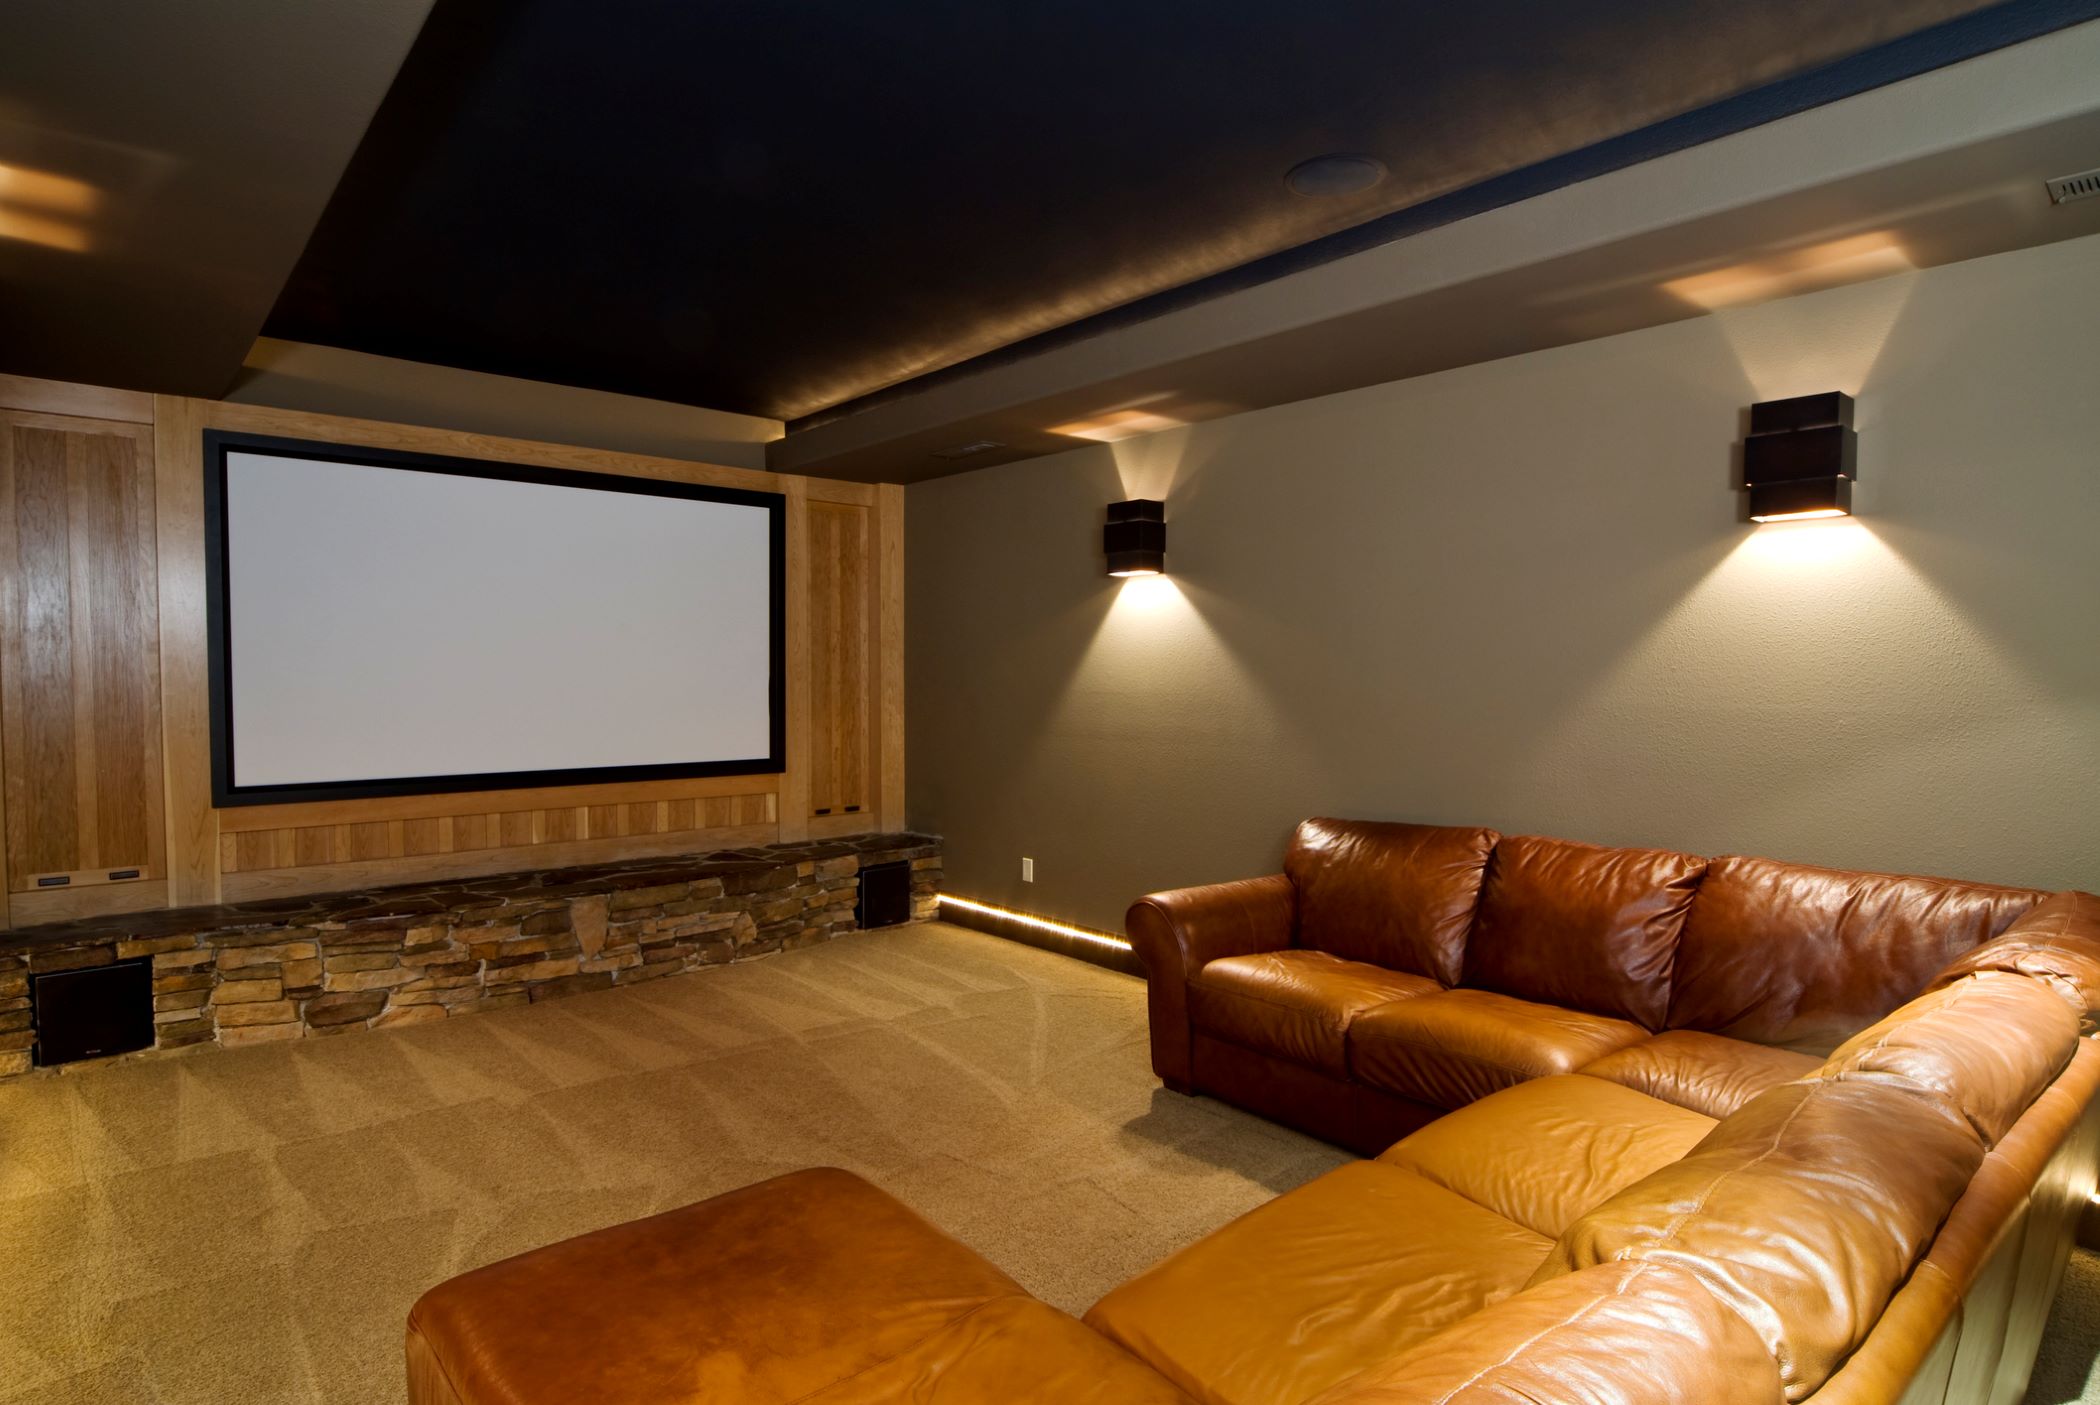 How to make a cinema at home